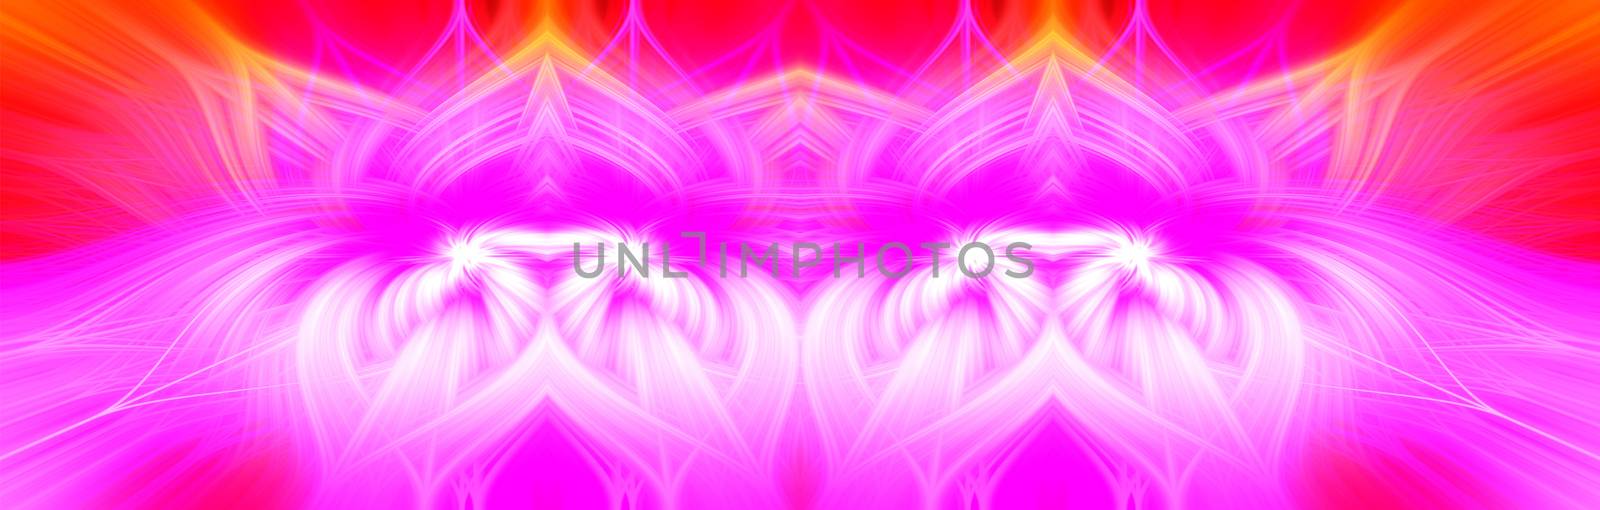 Beautiful abstract intertwined 3d fibers forming a shape of sparkle, flame, flower, interlinked hearts, creature looking like a dragon. Pink, yellow, red and purple colors. Illustration. Banner size